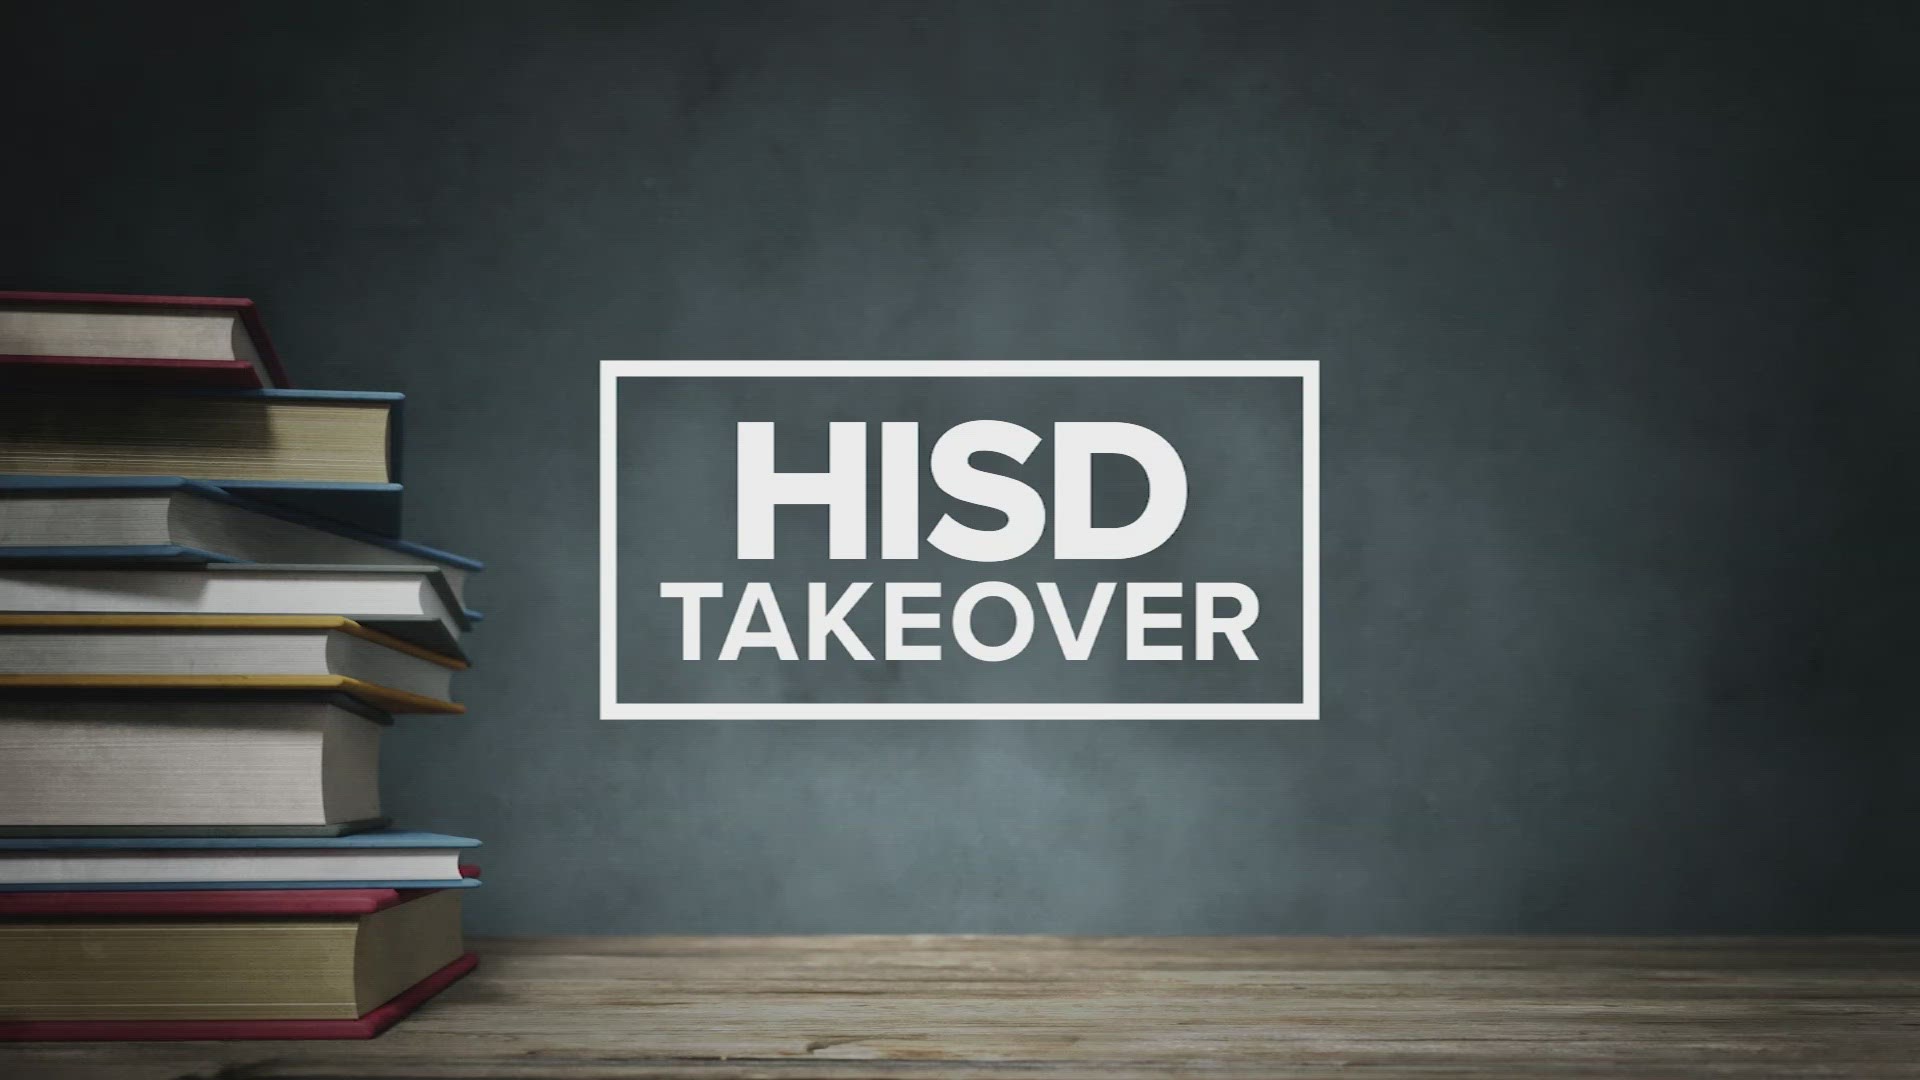 The state agency announced a takeover of Houston ISD Wednesday morning.